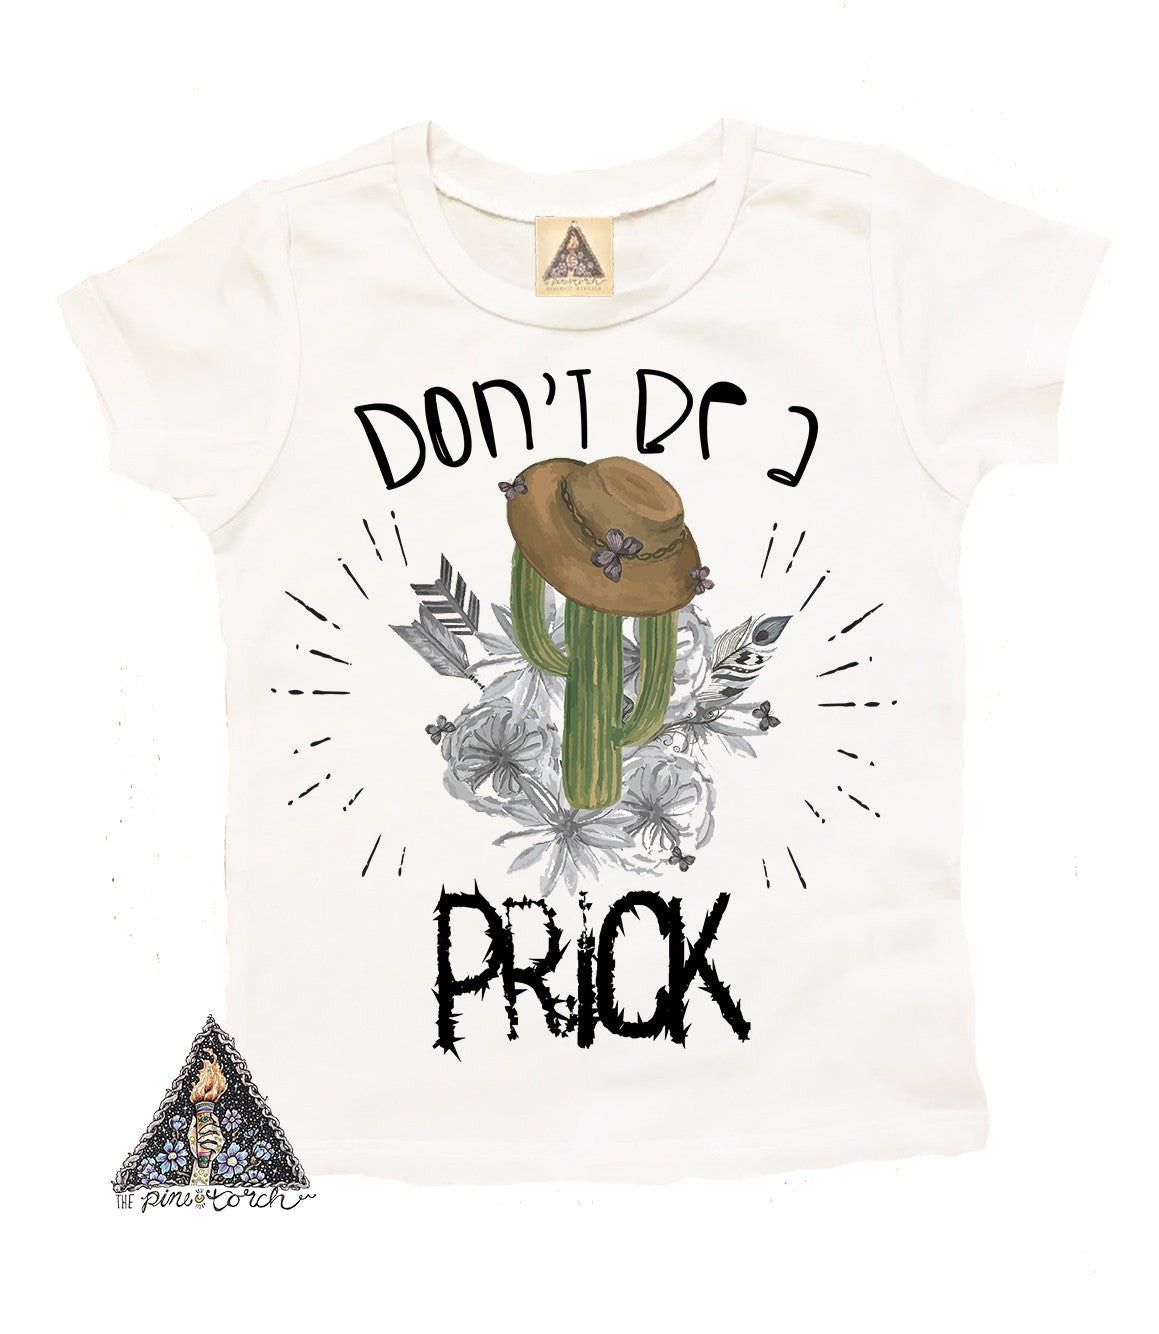 « DON'T BE A PRICK » KID'S TEE